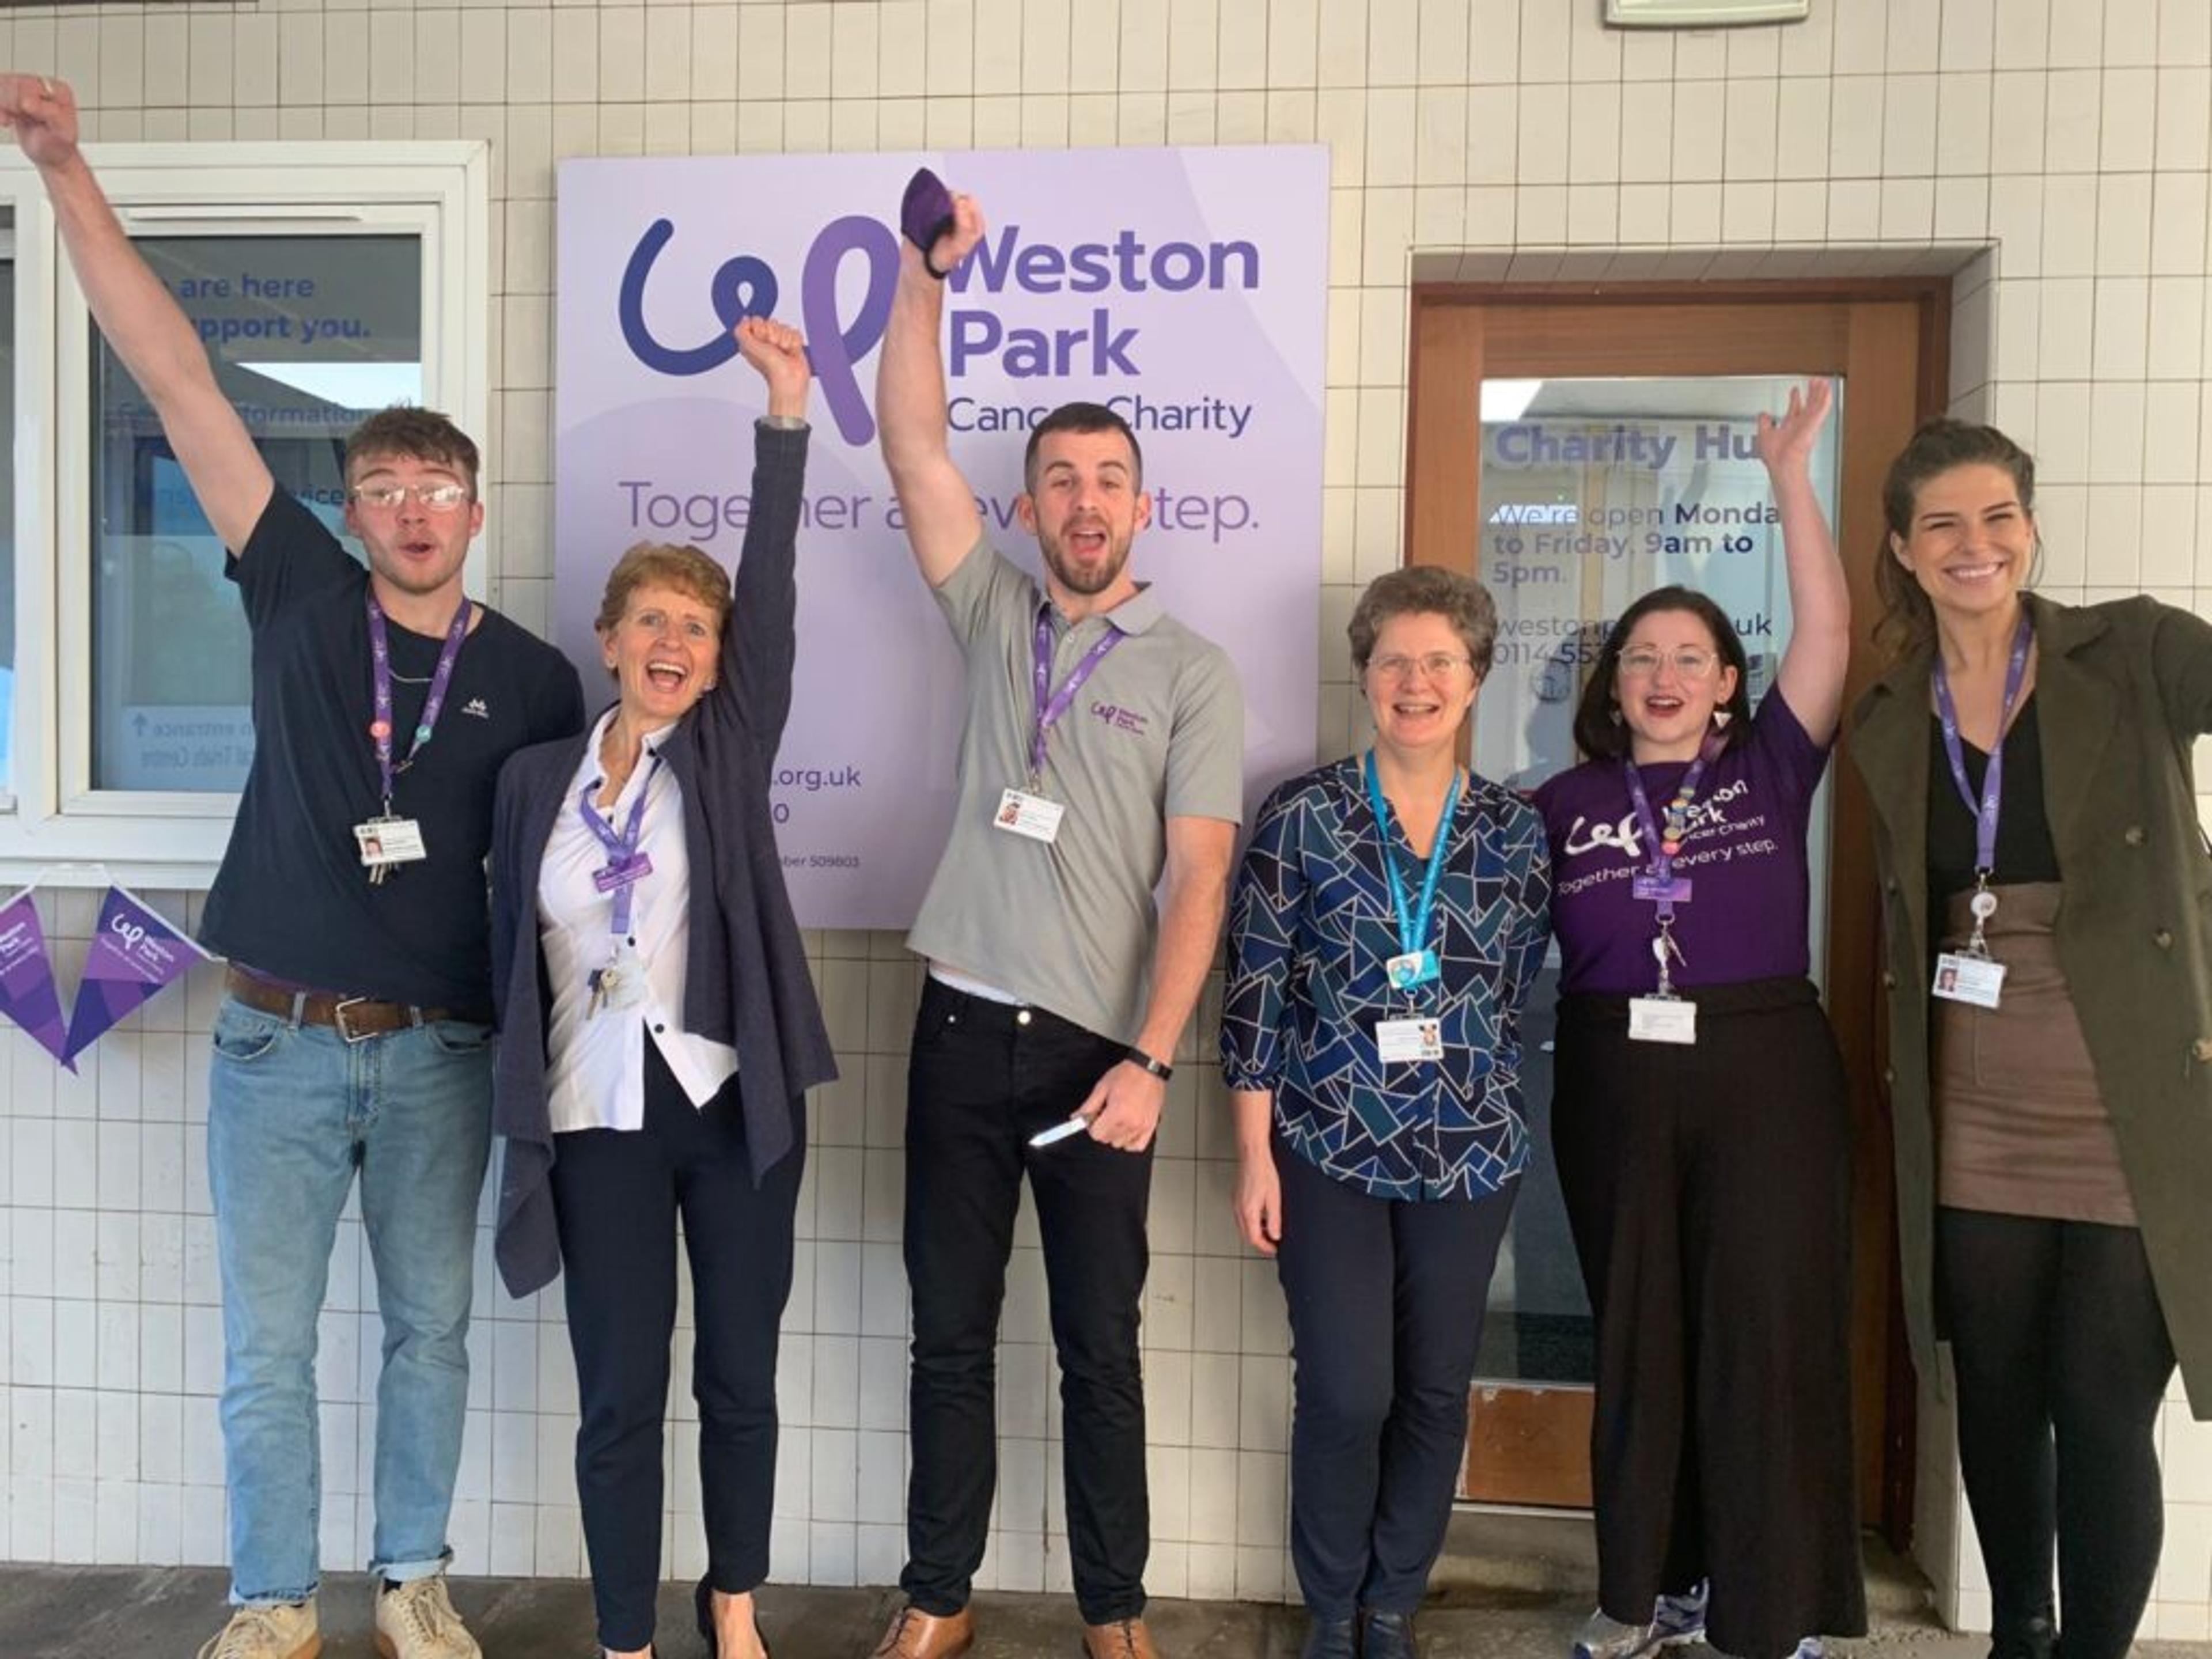 6 members of weston park cancer charity stood outside an office smiling with their hands in the air.